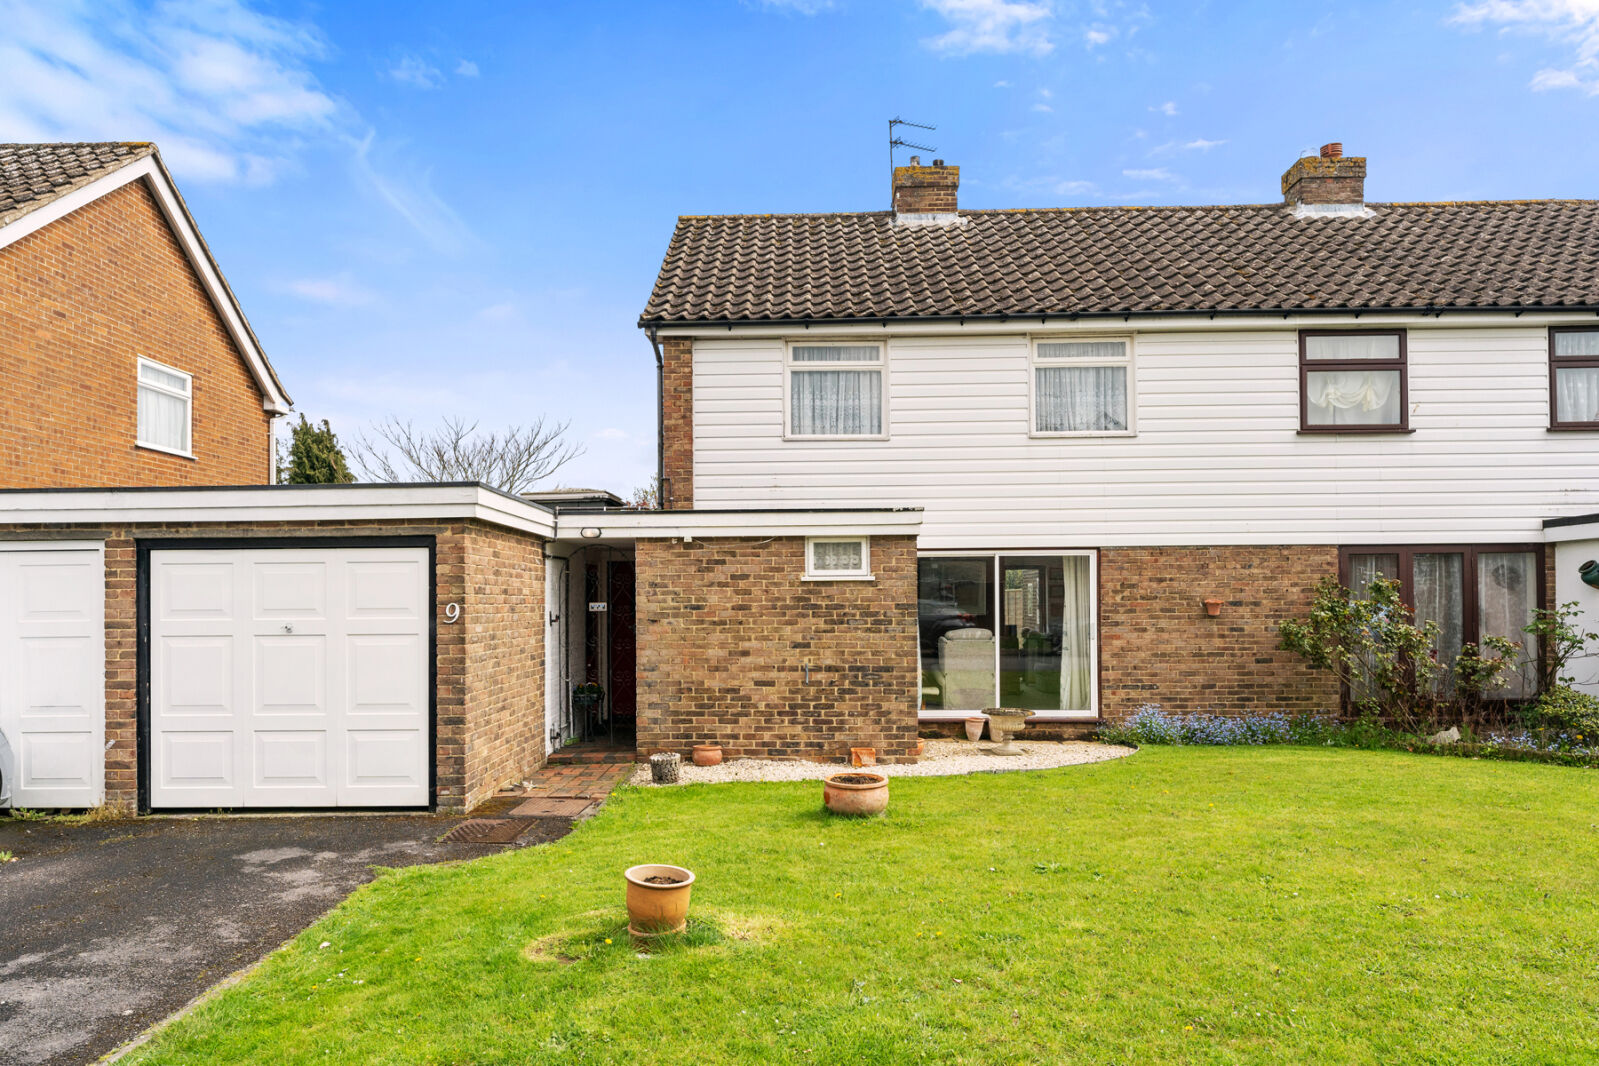 3 bedroom semi detached house for sale Wetherfield, Stansted, CM24, main image